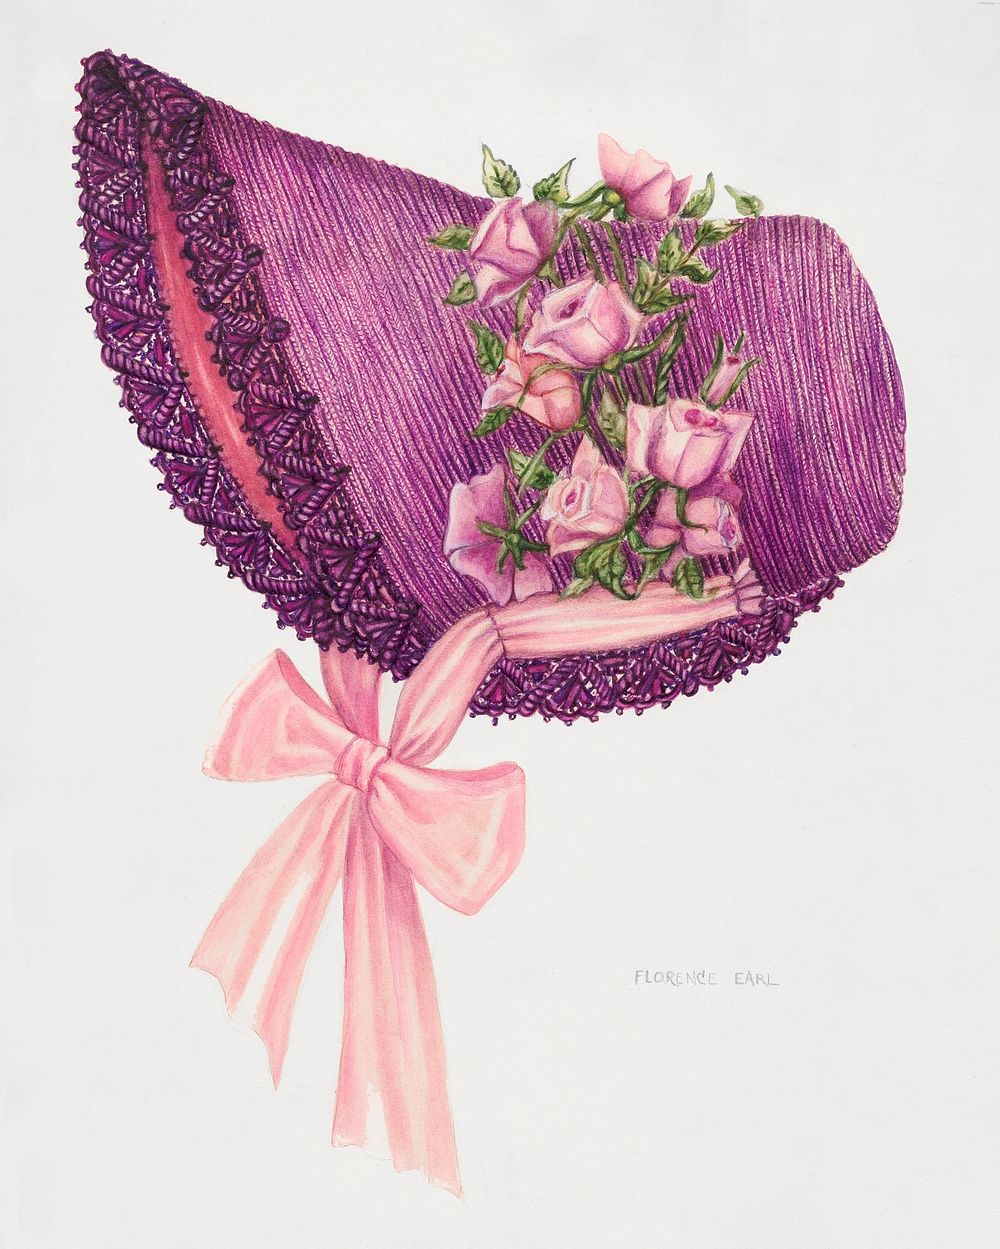 Hat (c. 1935&ndash;1942) by Florence Earl. Original from The National Gallery of Art. Digitally enhanced by rawpixel.